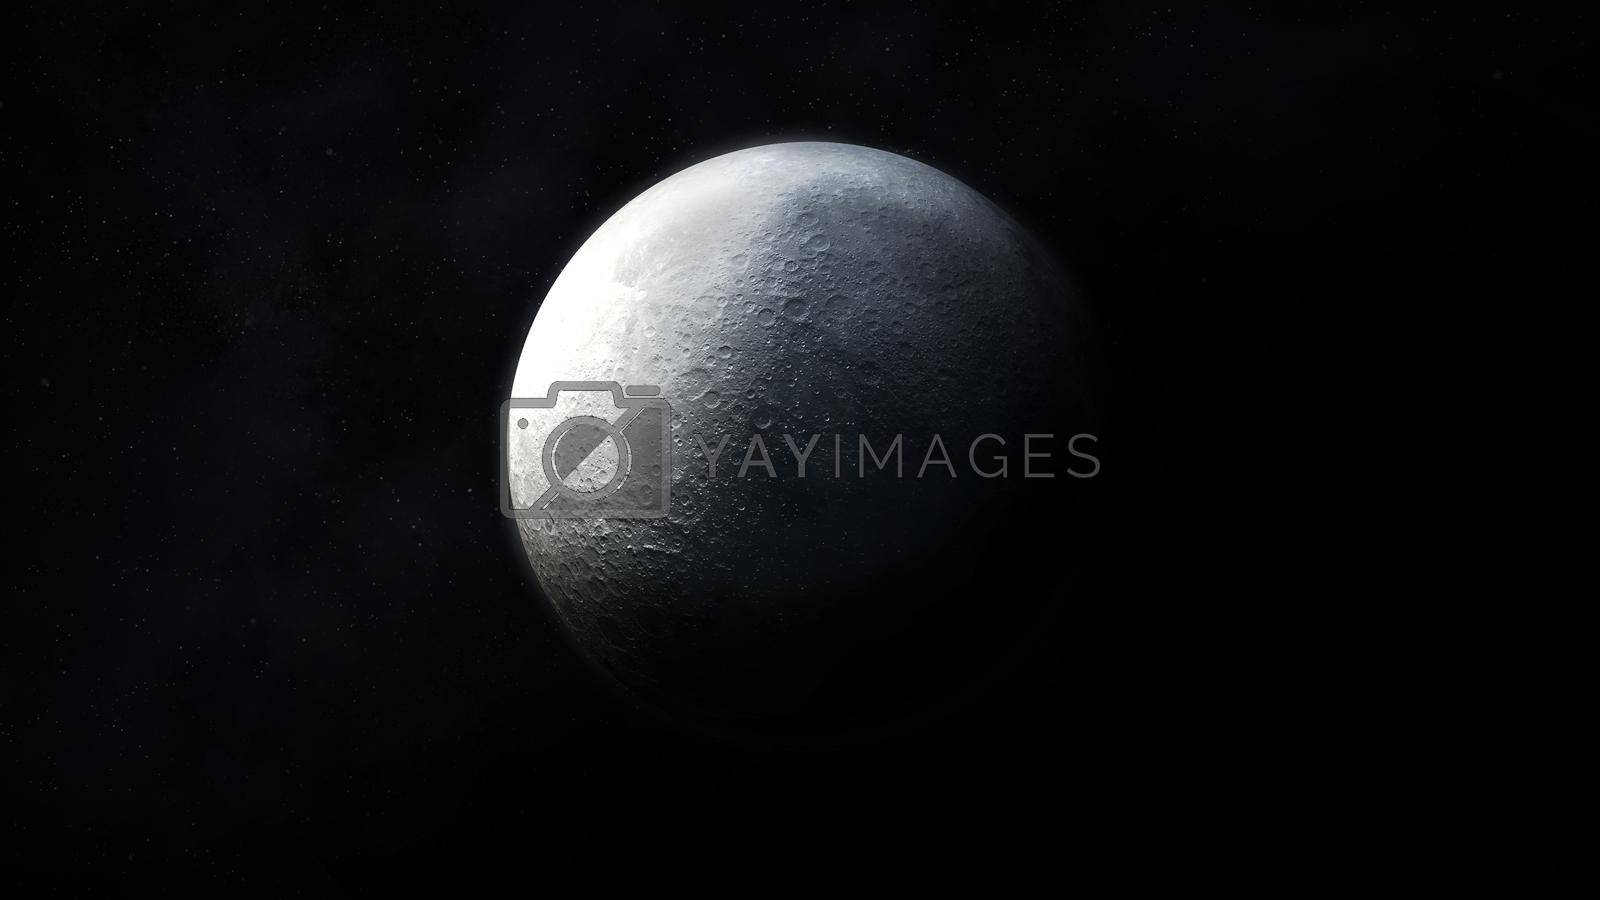 Royalty free image of Dark gray image of a half-illuminated moon in space. by ConceptCafe